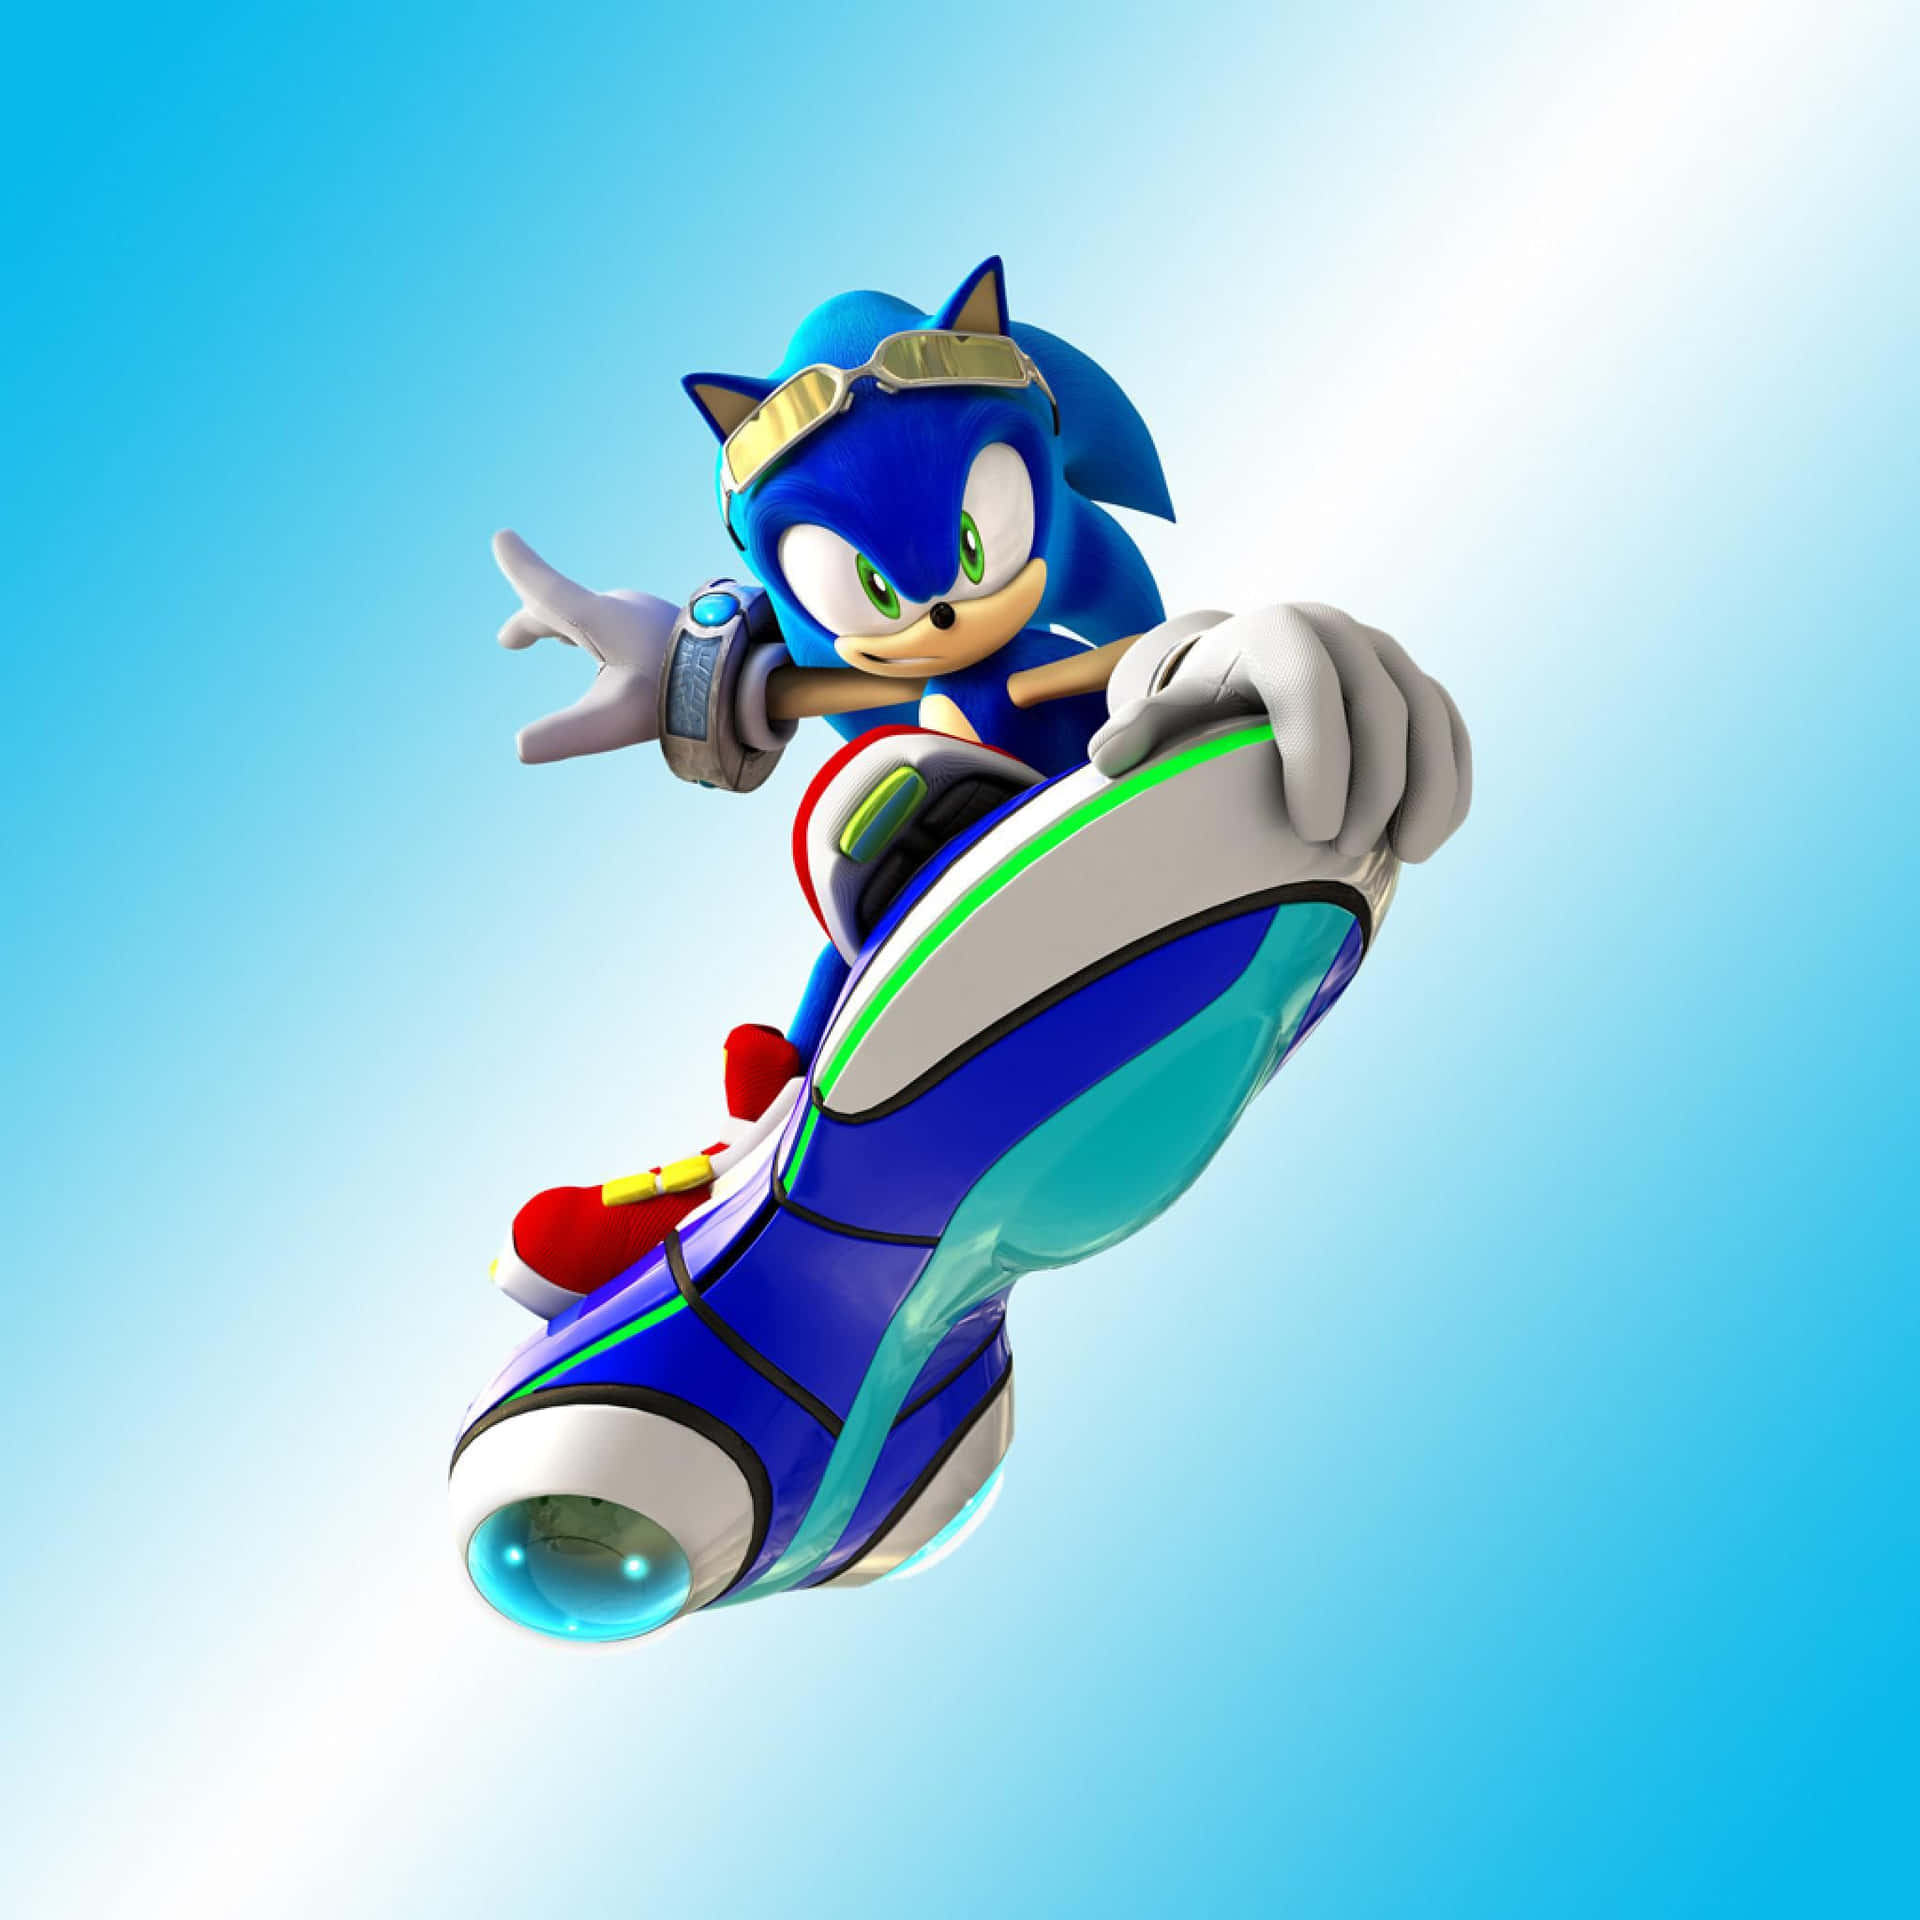 Sonic The Hedgehog Jumping In The Air Wallpaper